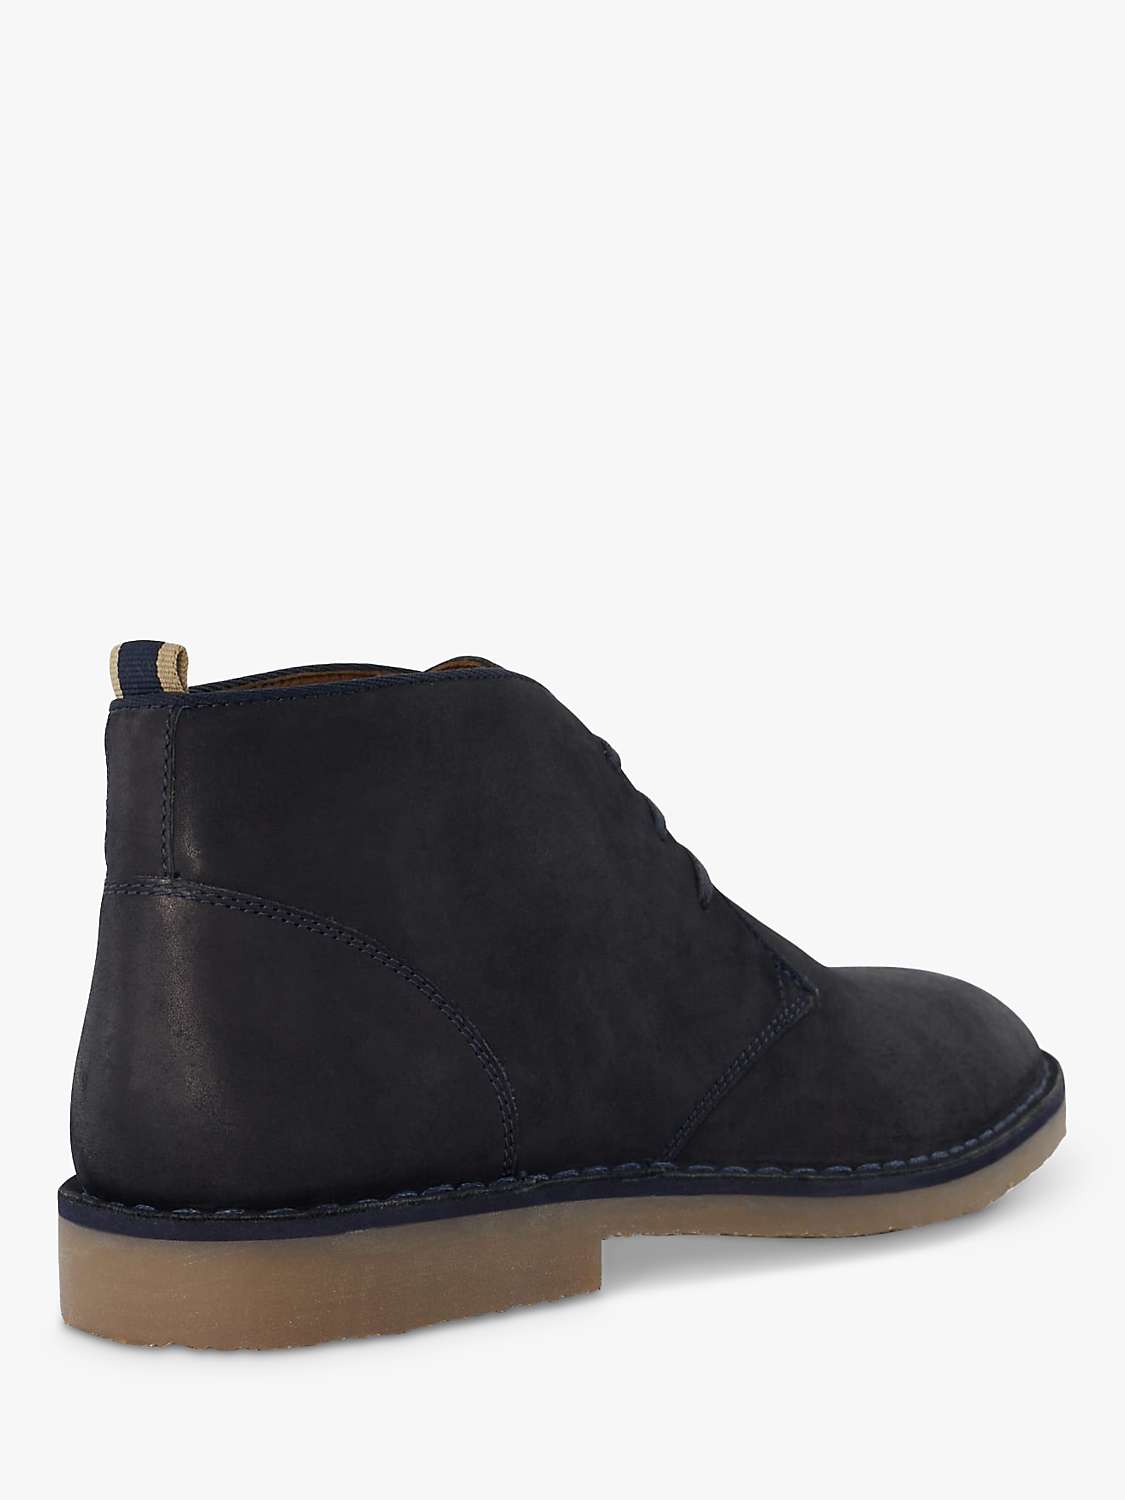 Buy Dune Cashed Lace Up Chukka Boots, Navy Online at johnlewis.com